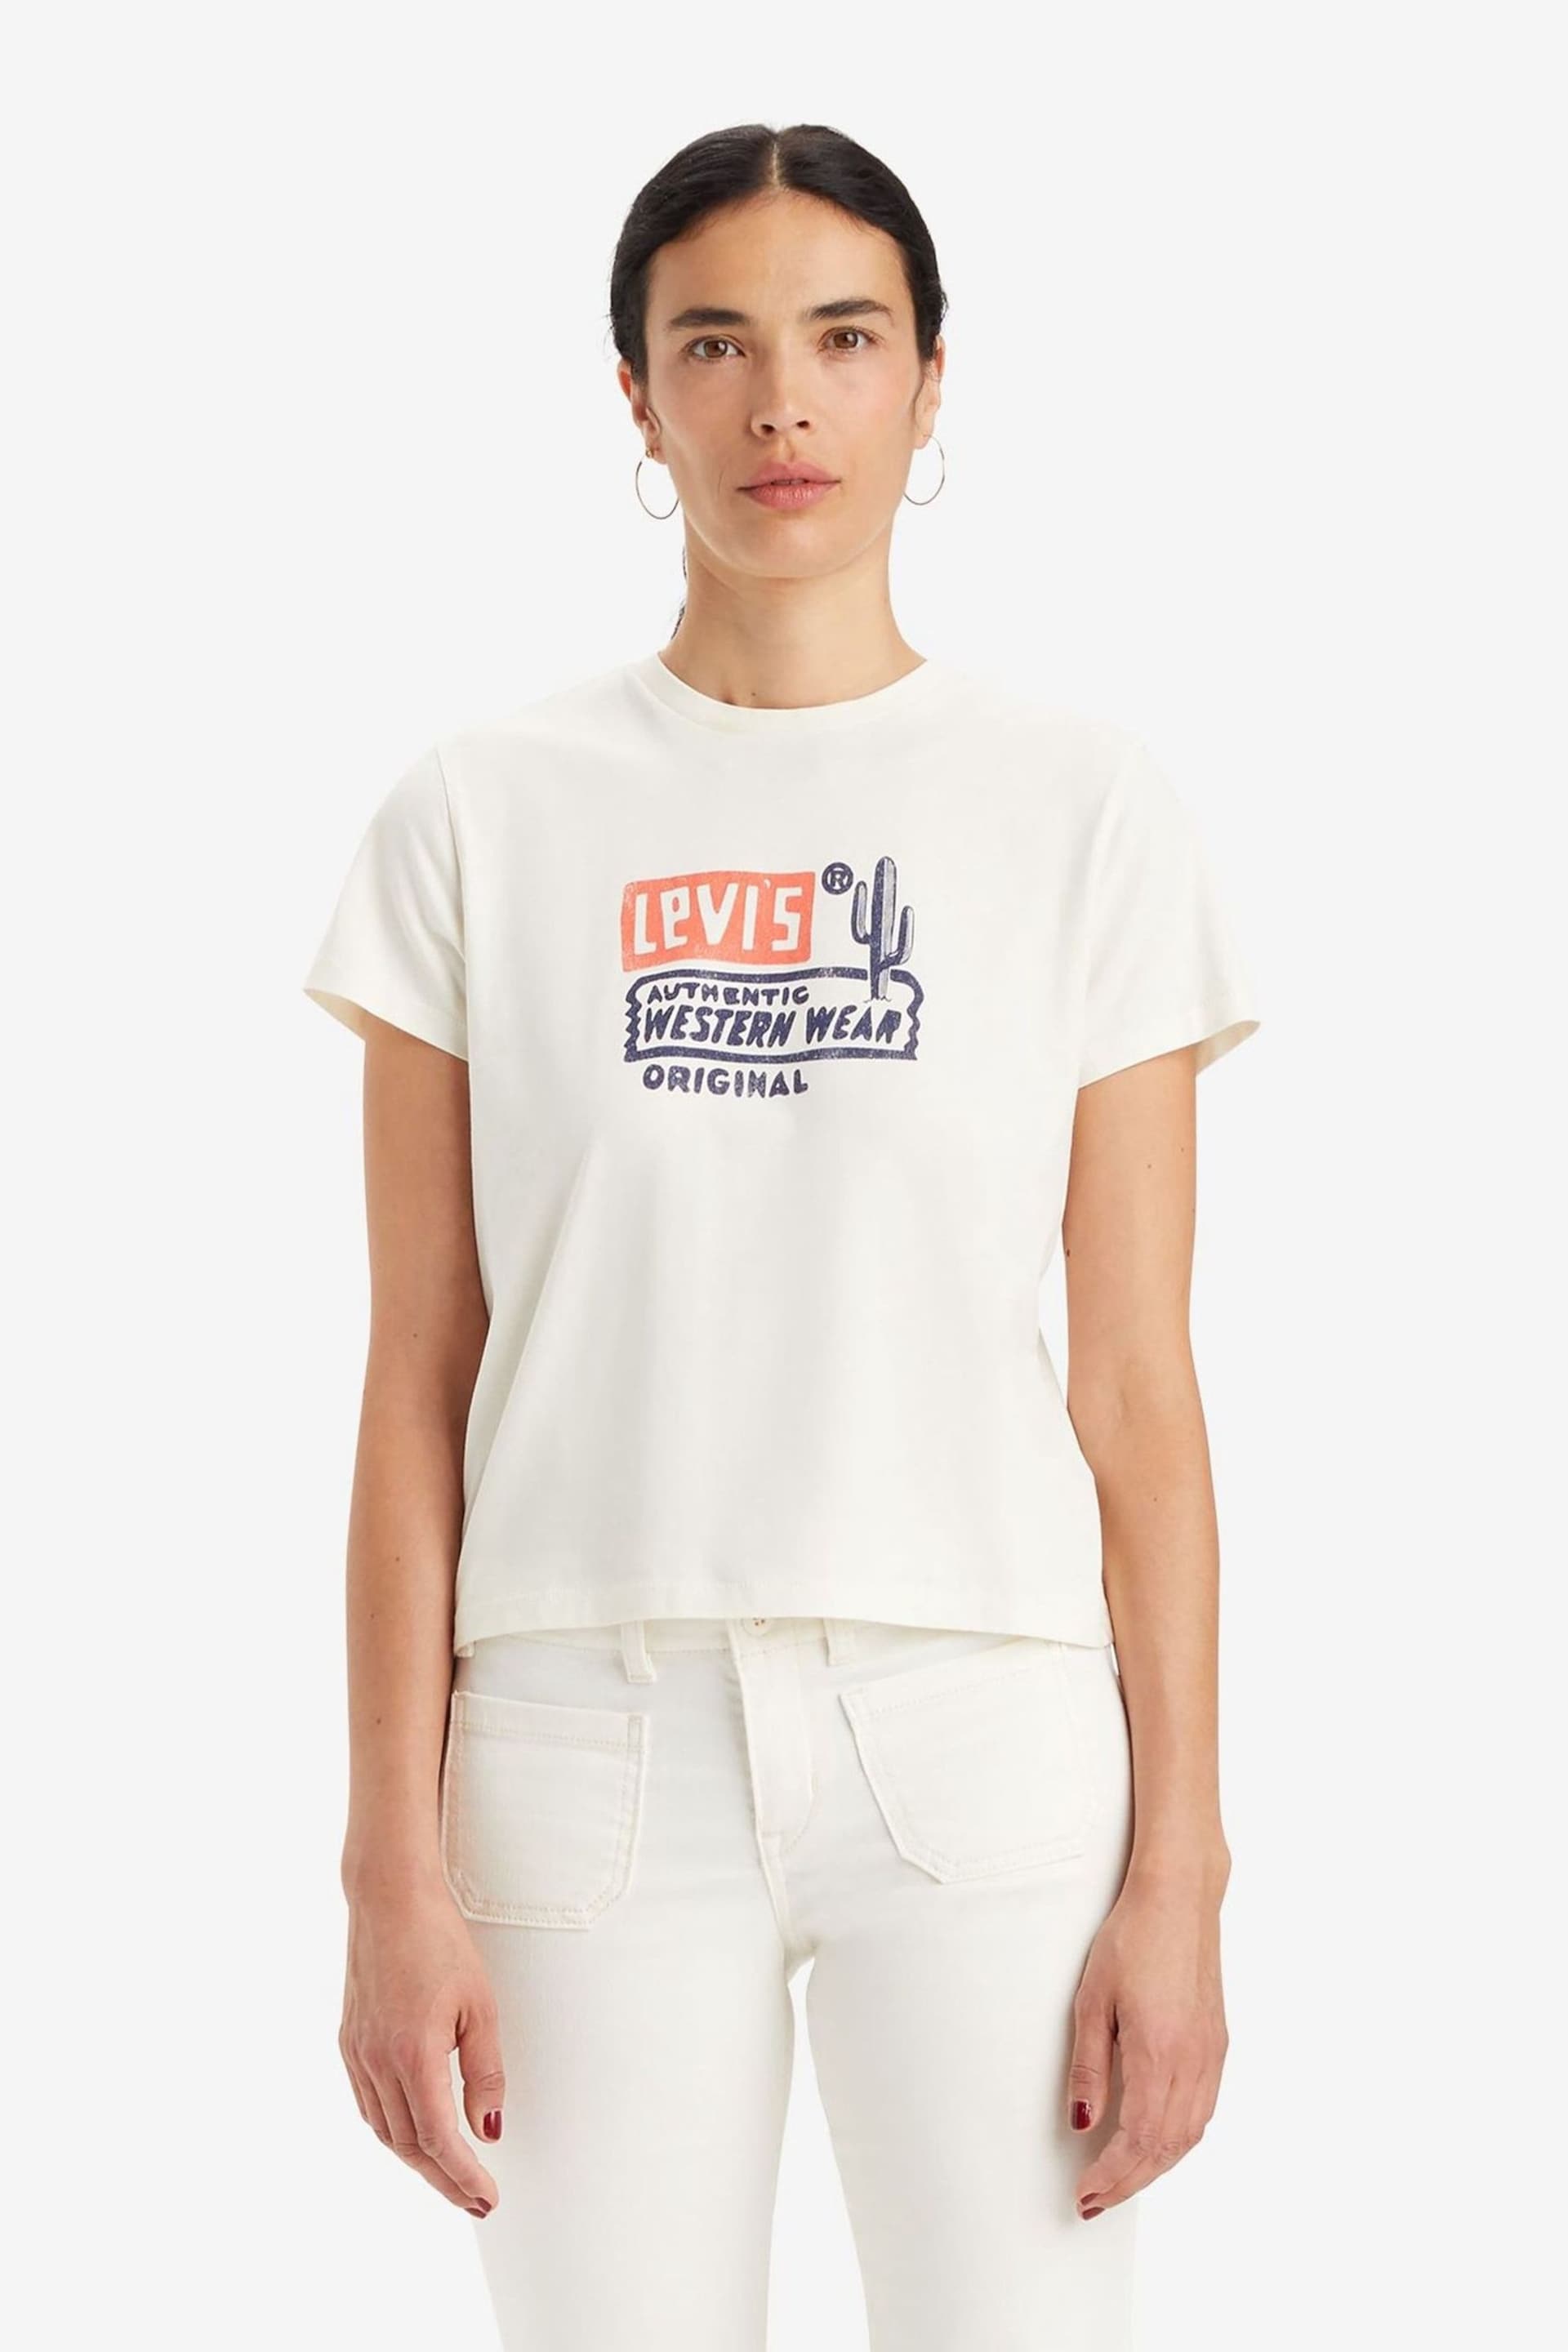 Levi's® Western Wear Egret Graphic Classic T-Shirt - Image 1 of 7